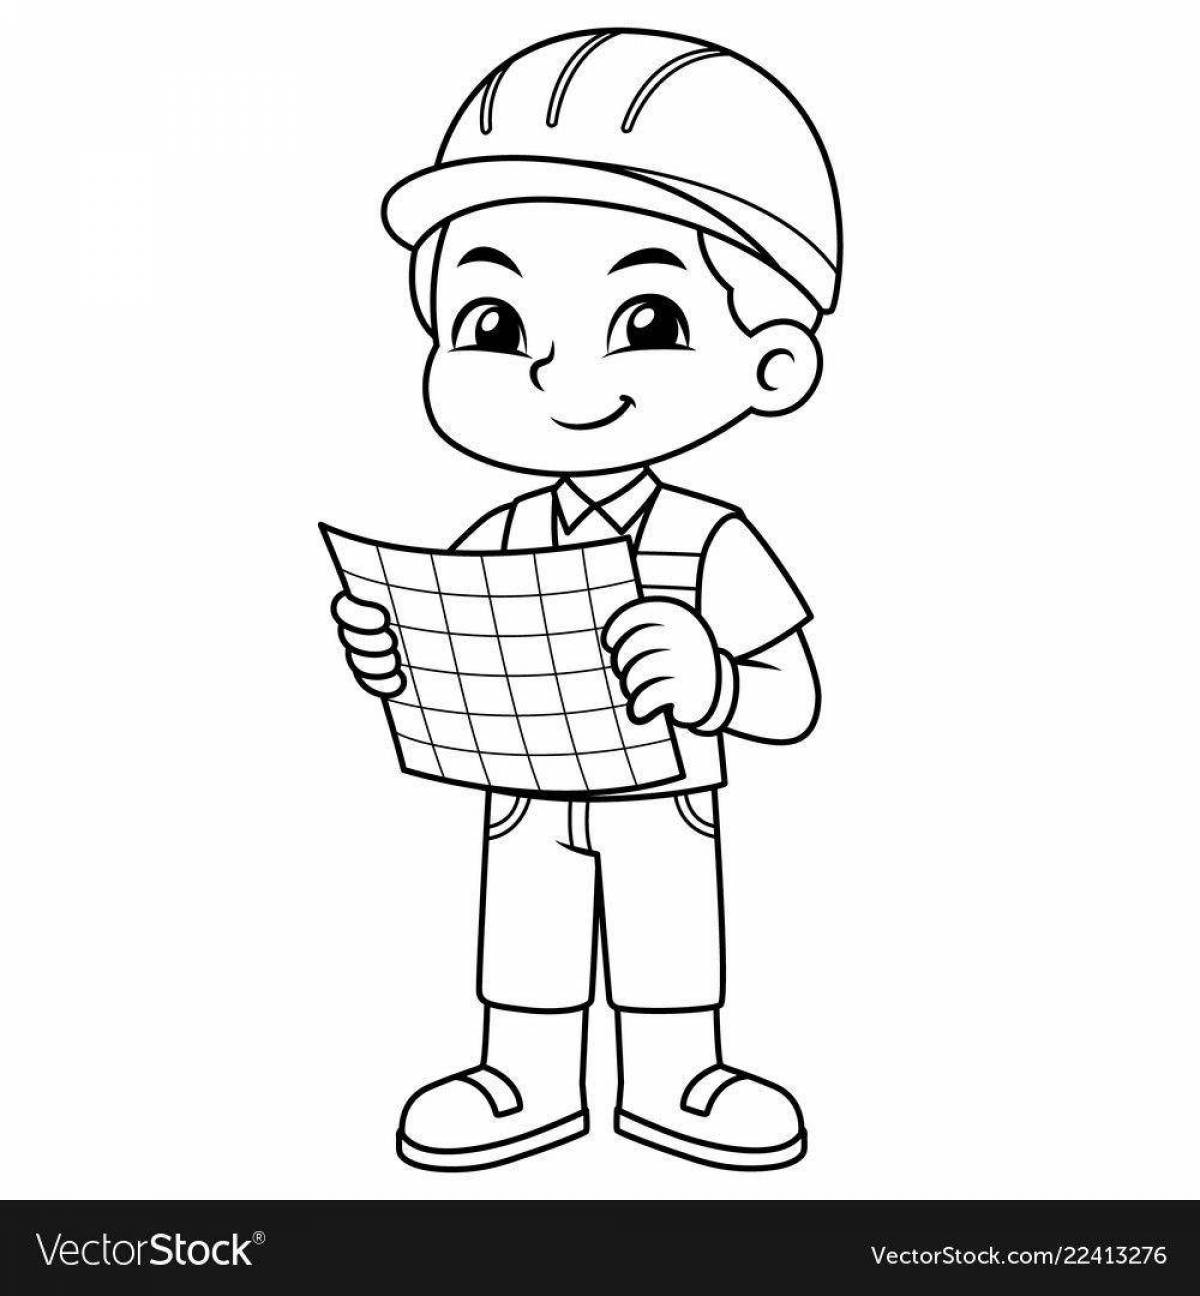 Coloring book cheerful bricklayer for children